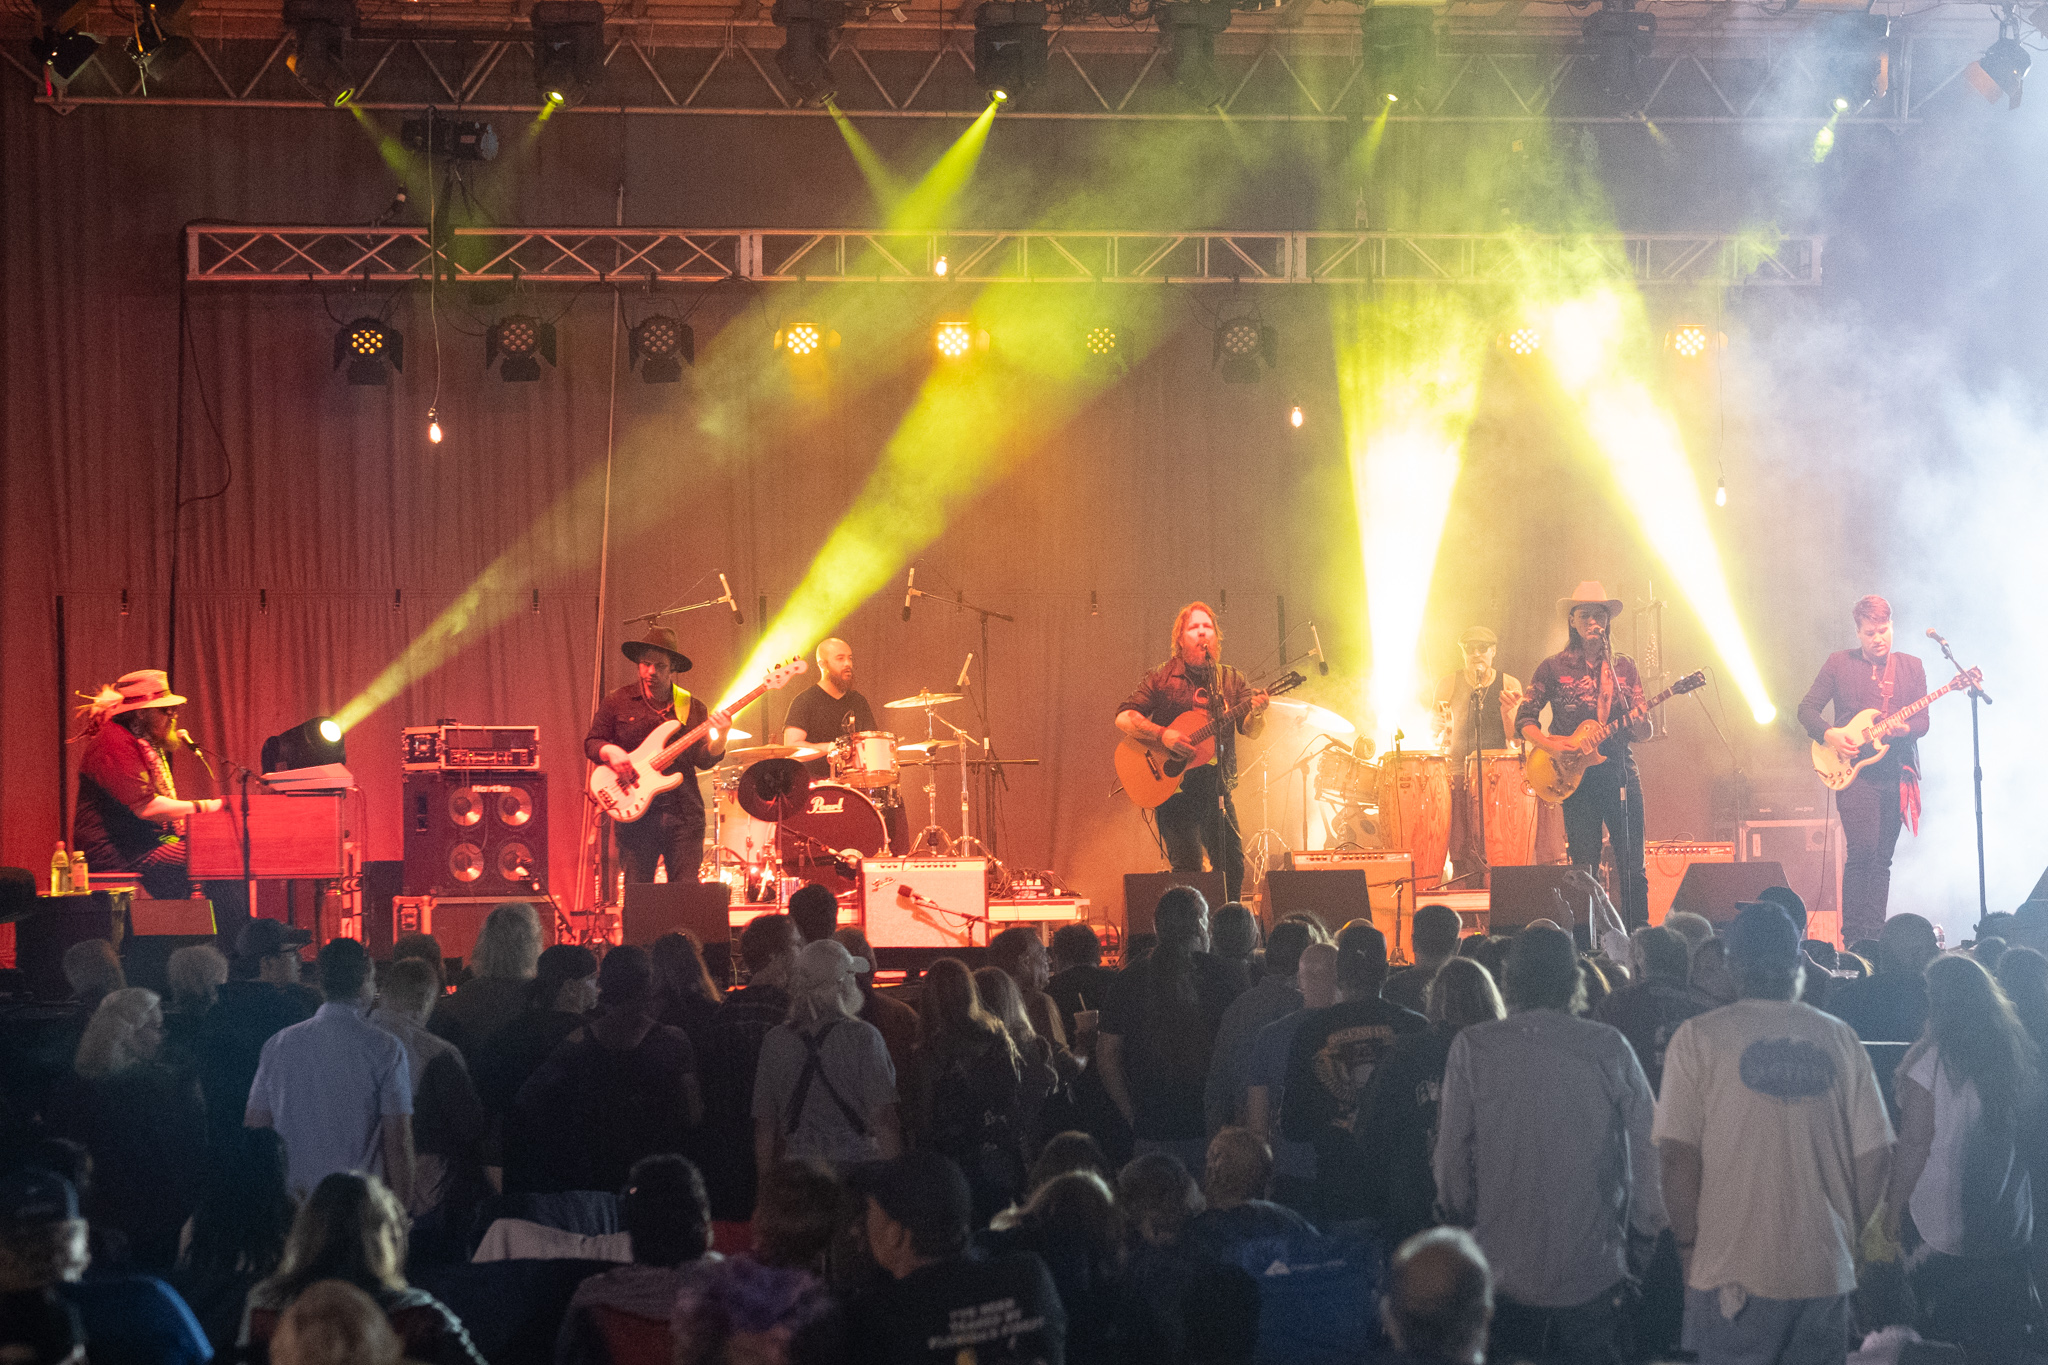 6 person band on stage with crowd in front at night 4 yellow beams of light pointing up to stage lighting above